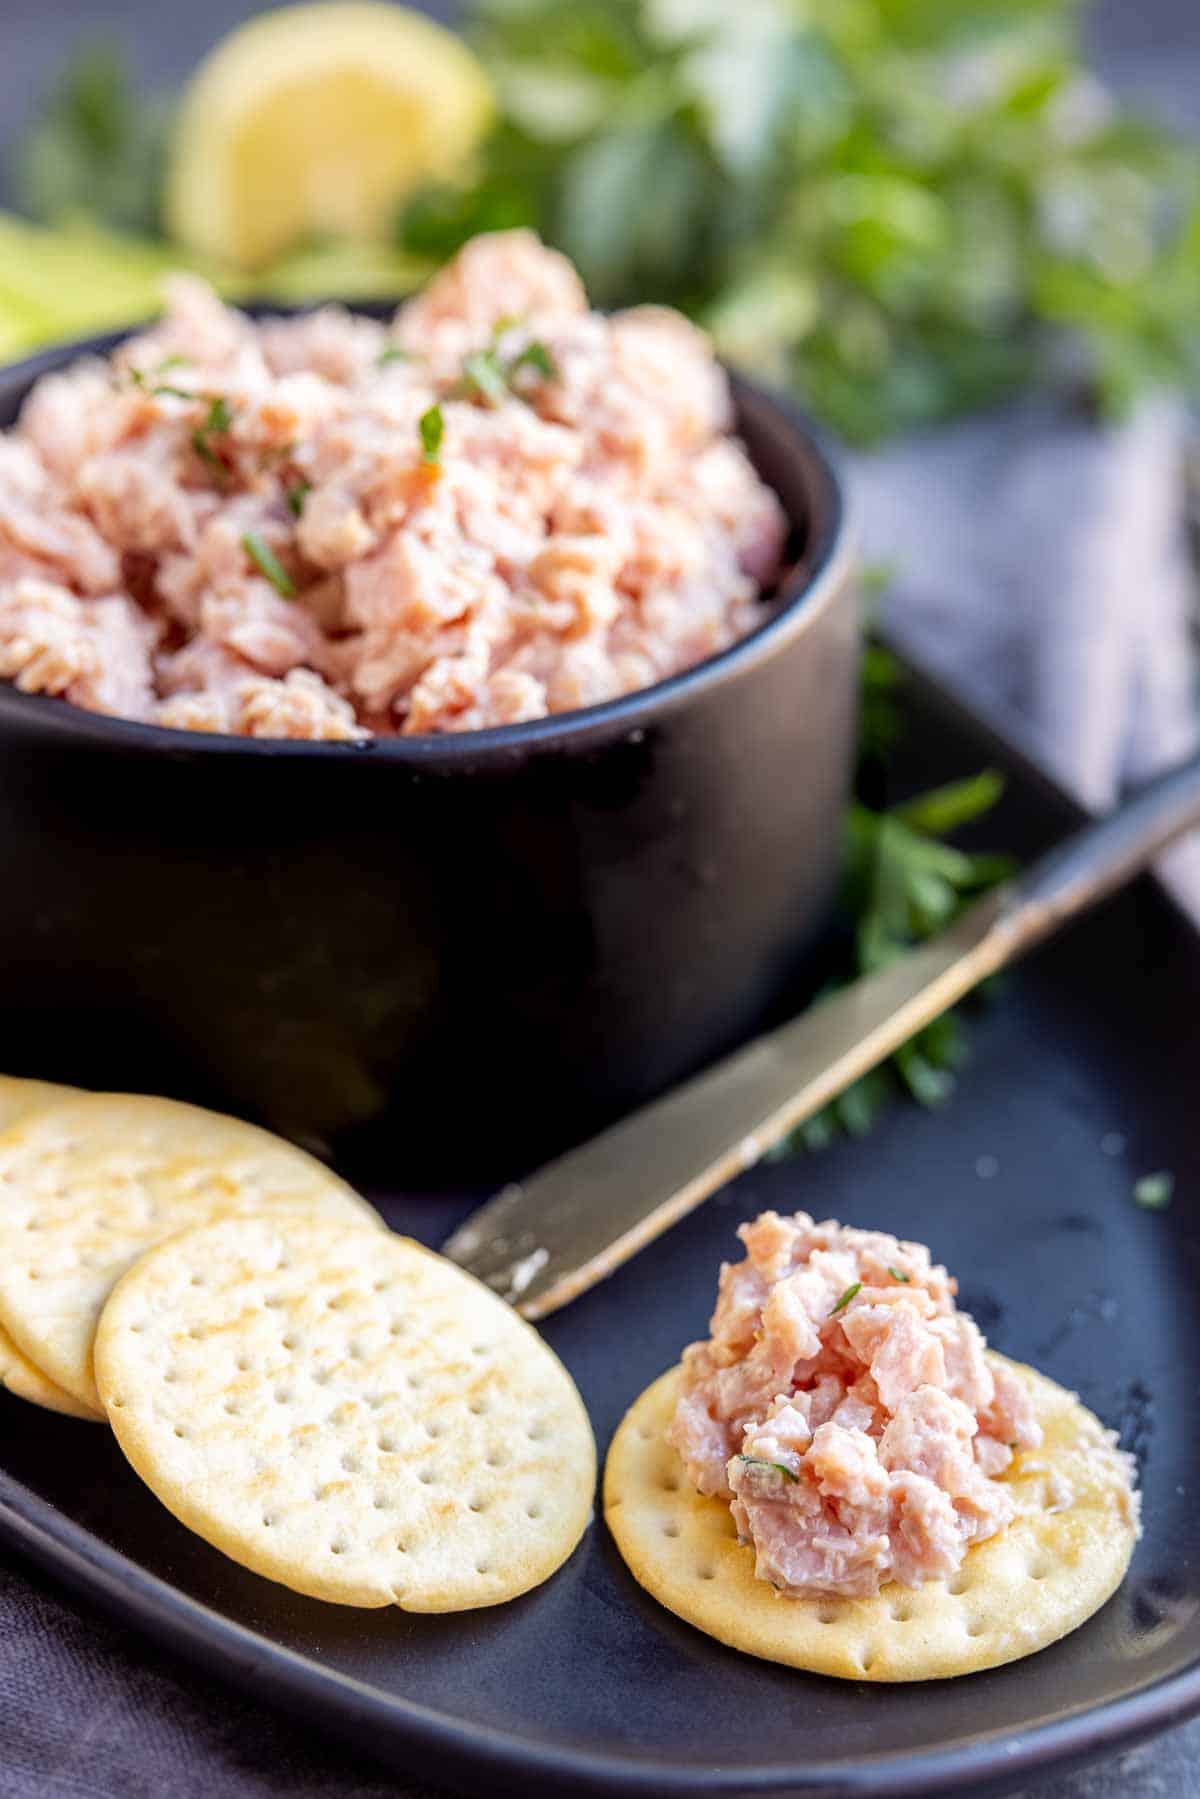 Deviled Ham spread on a cracker